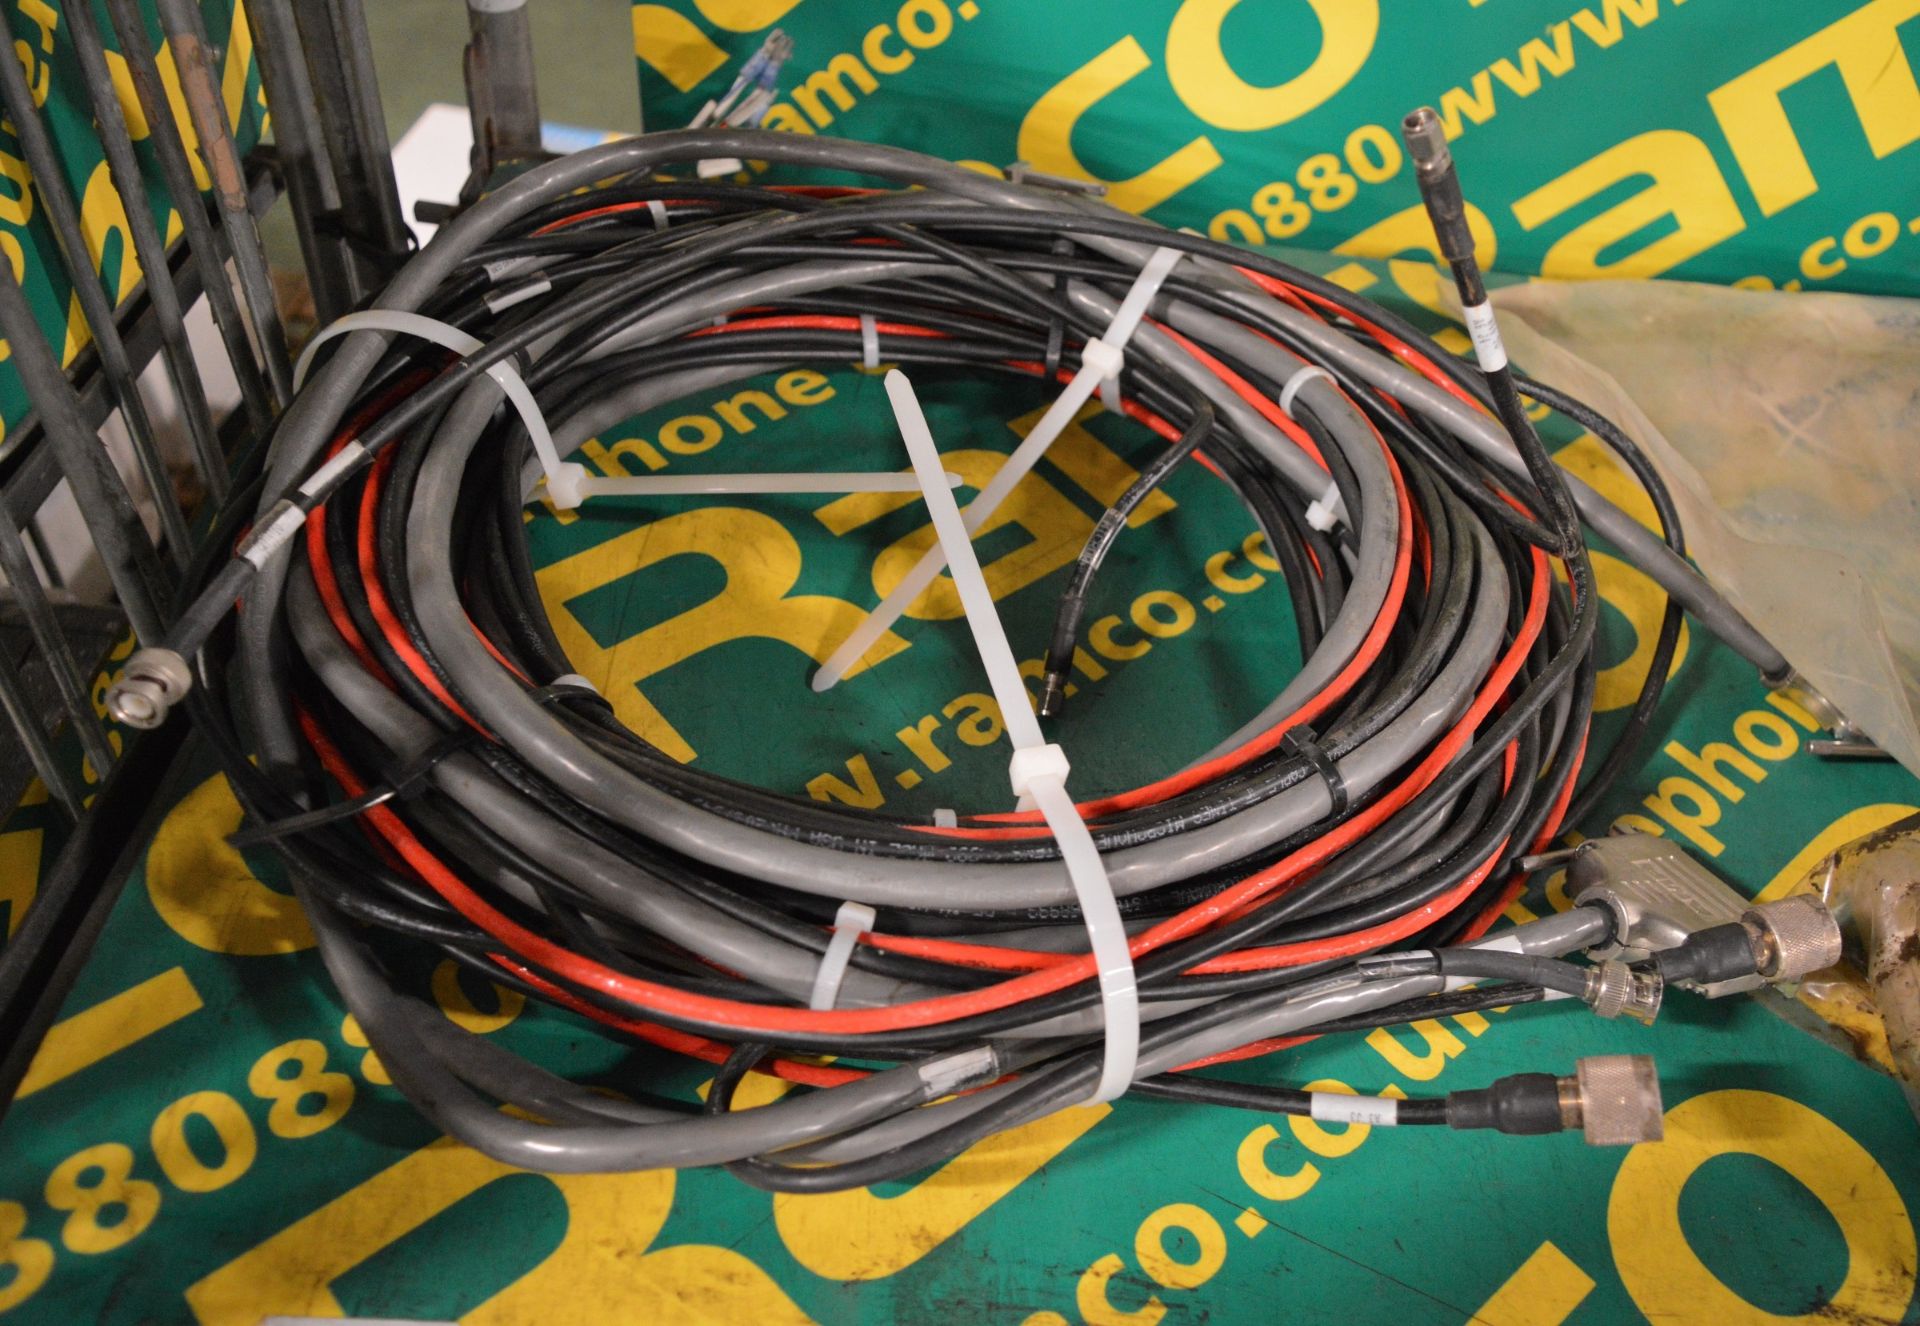 Trailer Light Board & Radiac Meter Cables - Image 2 of 4